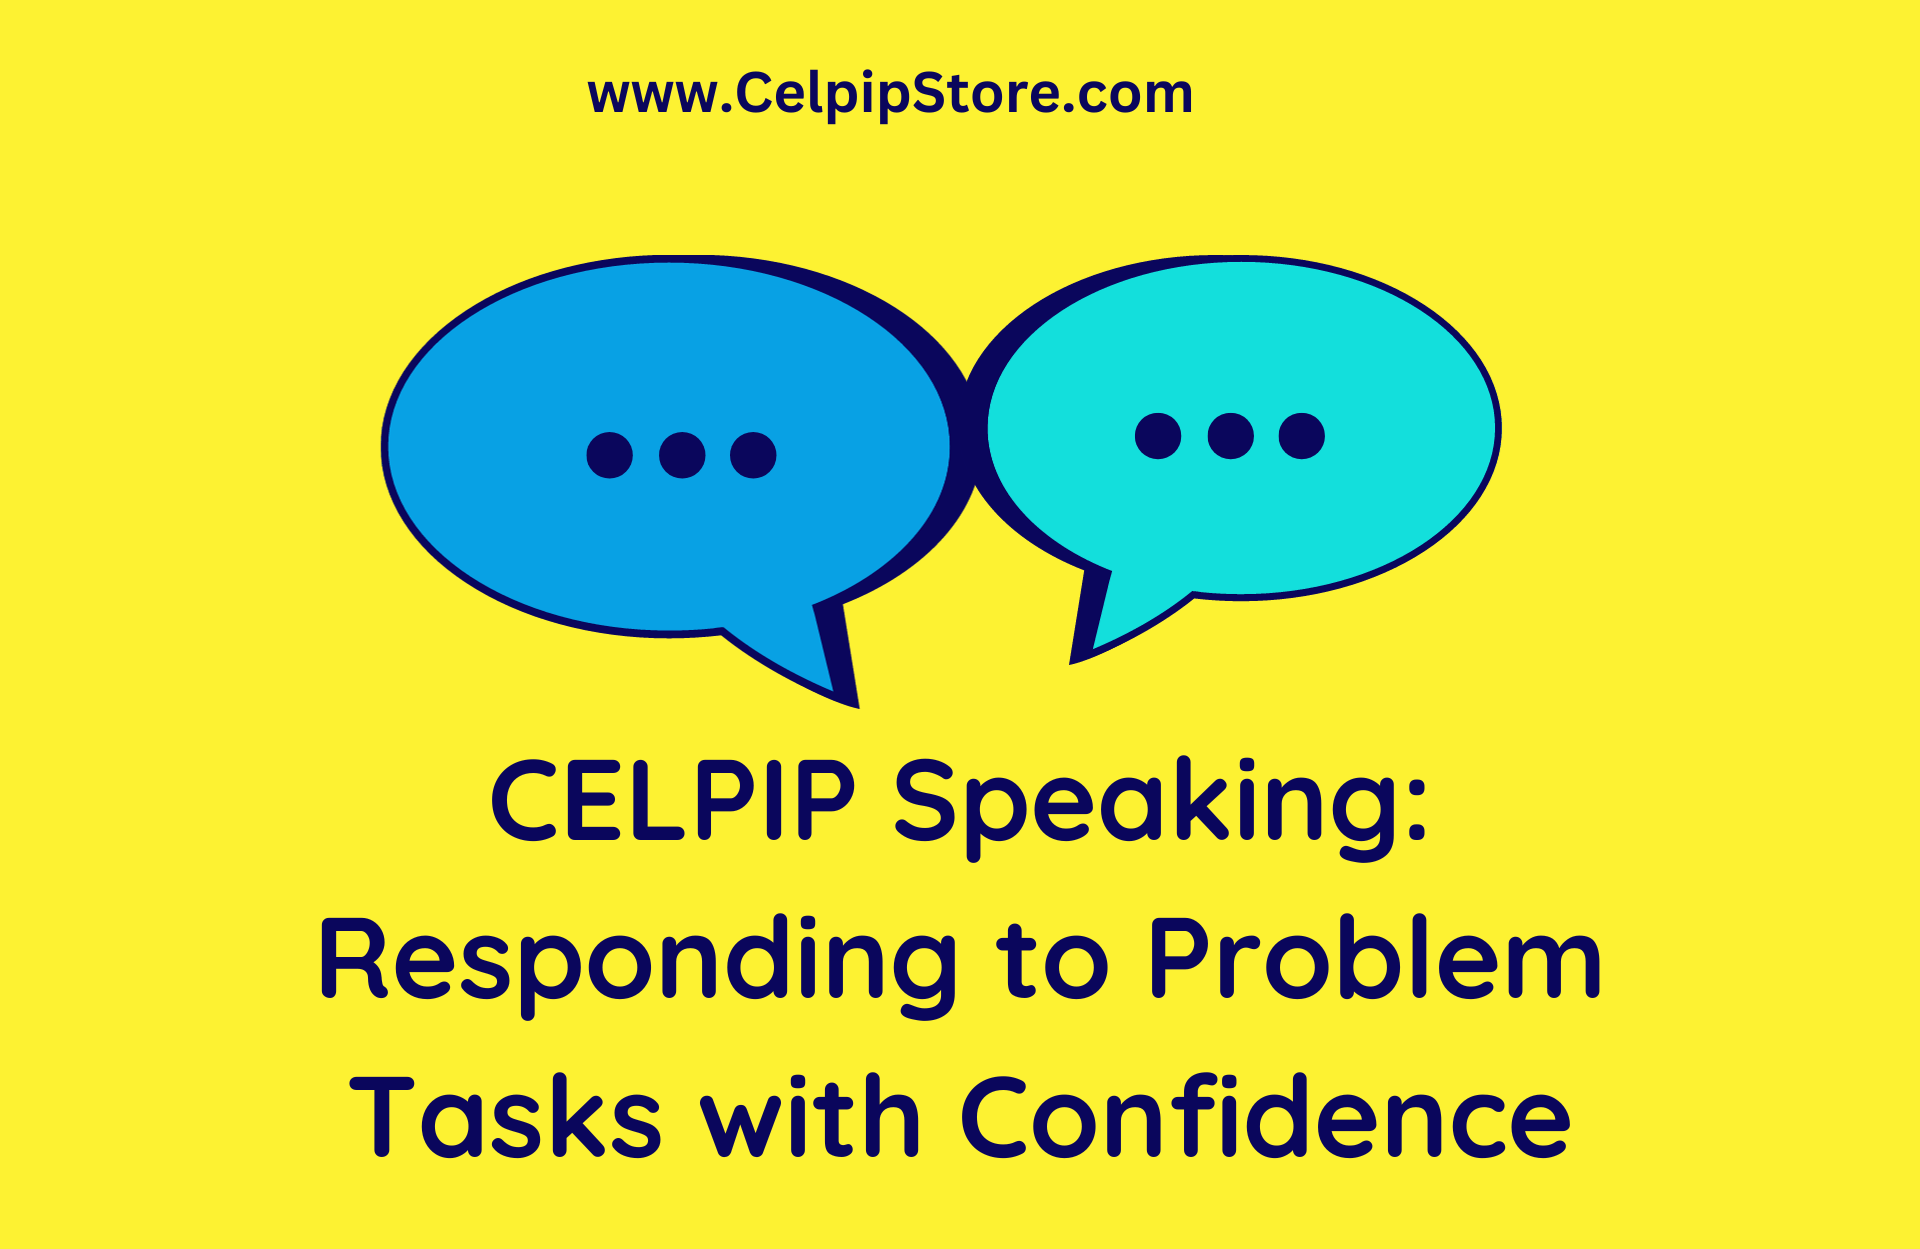 CELPIP Speaking: Responding to Problem Tasks with Confidence